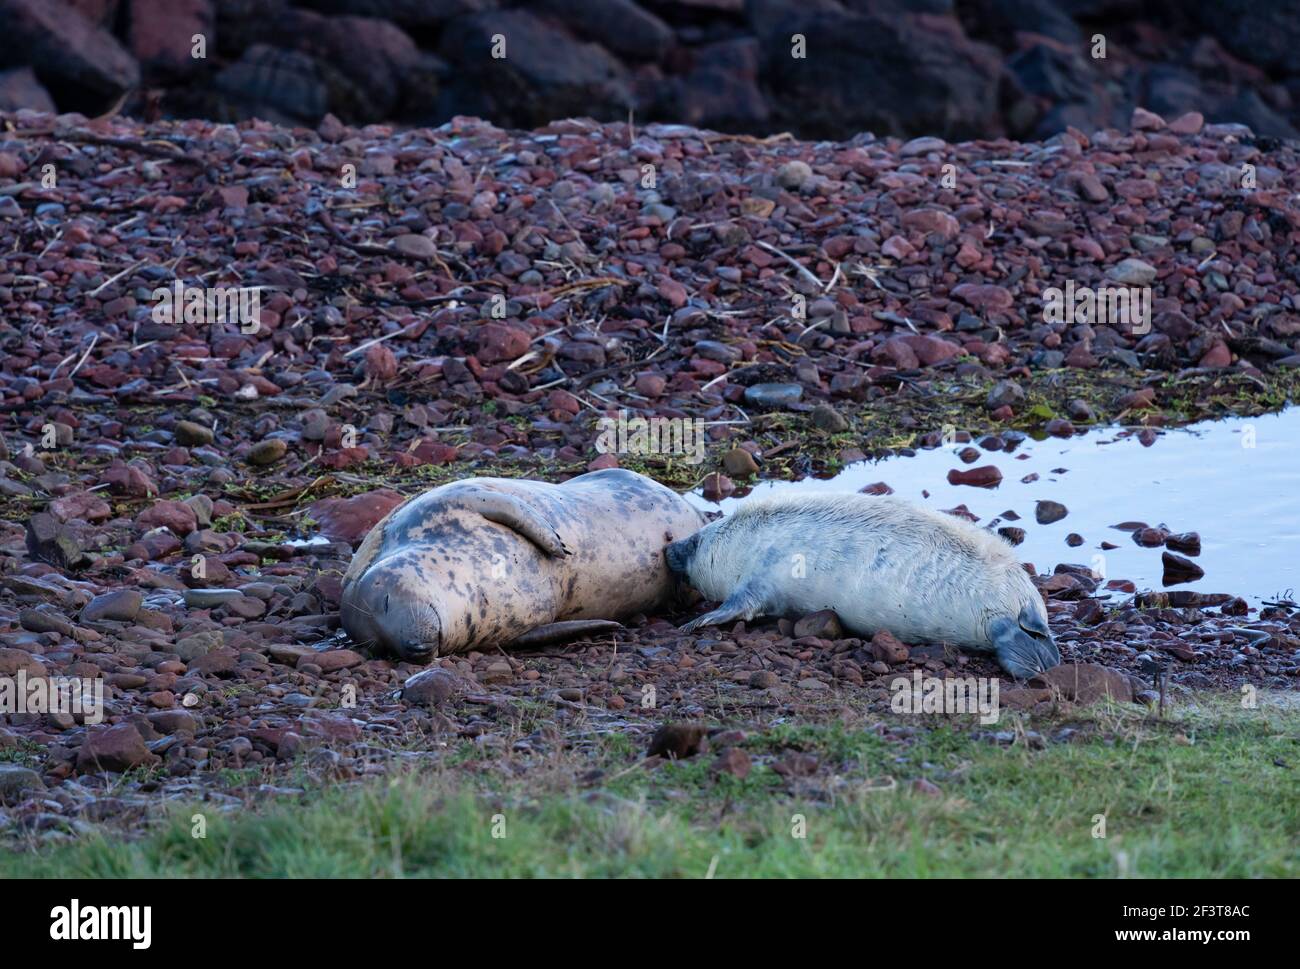 St Abbs, Berwickshire, Scotland - North Sea fishing village and nature reserve. Grey seal mother and pup feeding. Stock Photo